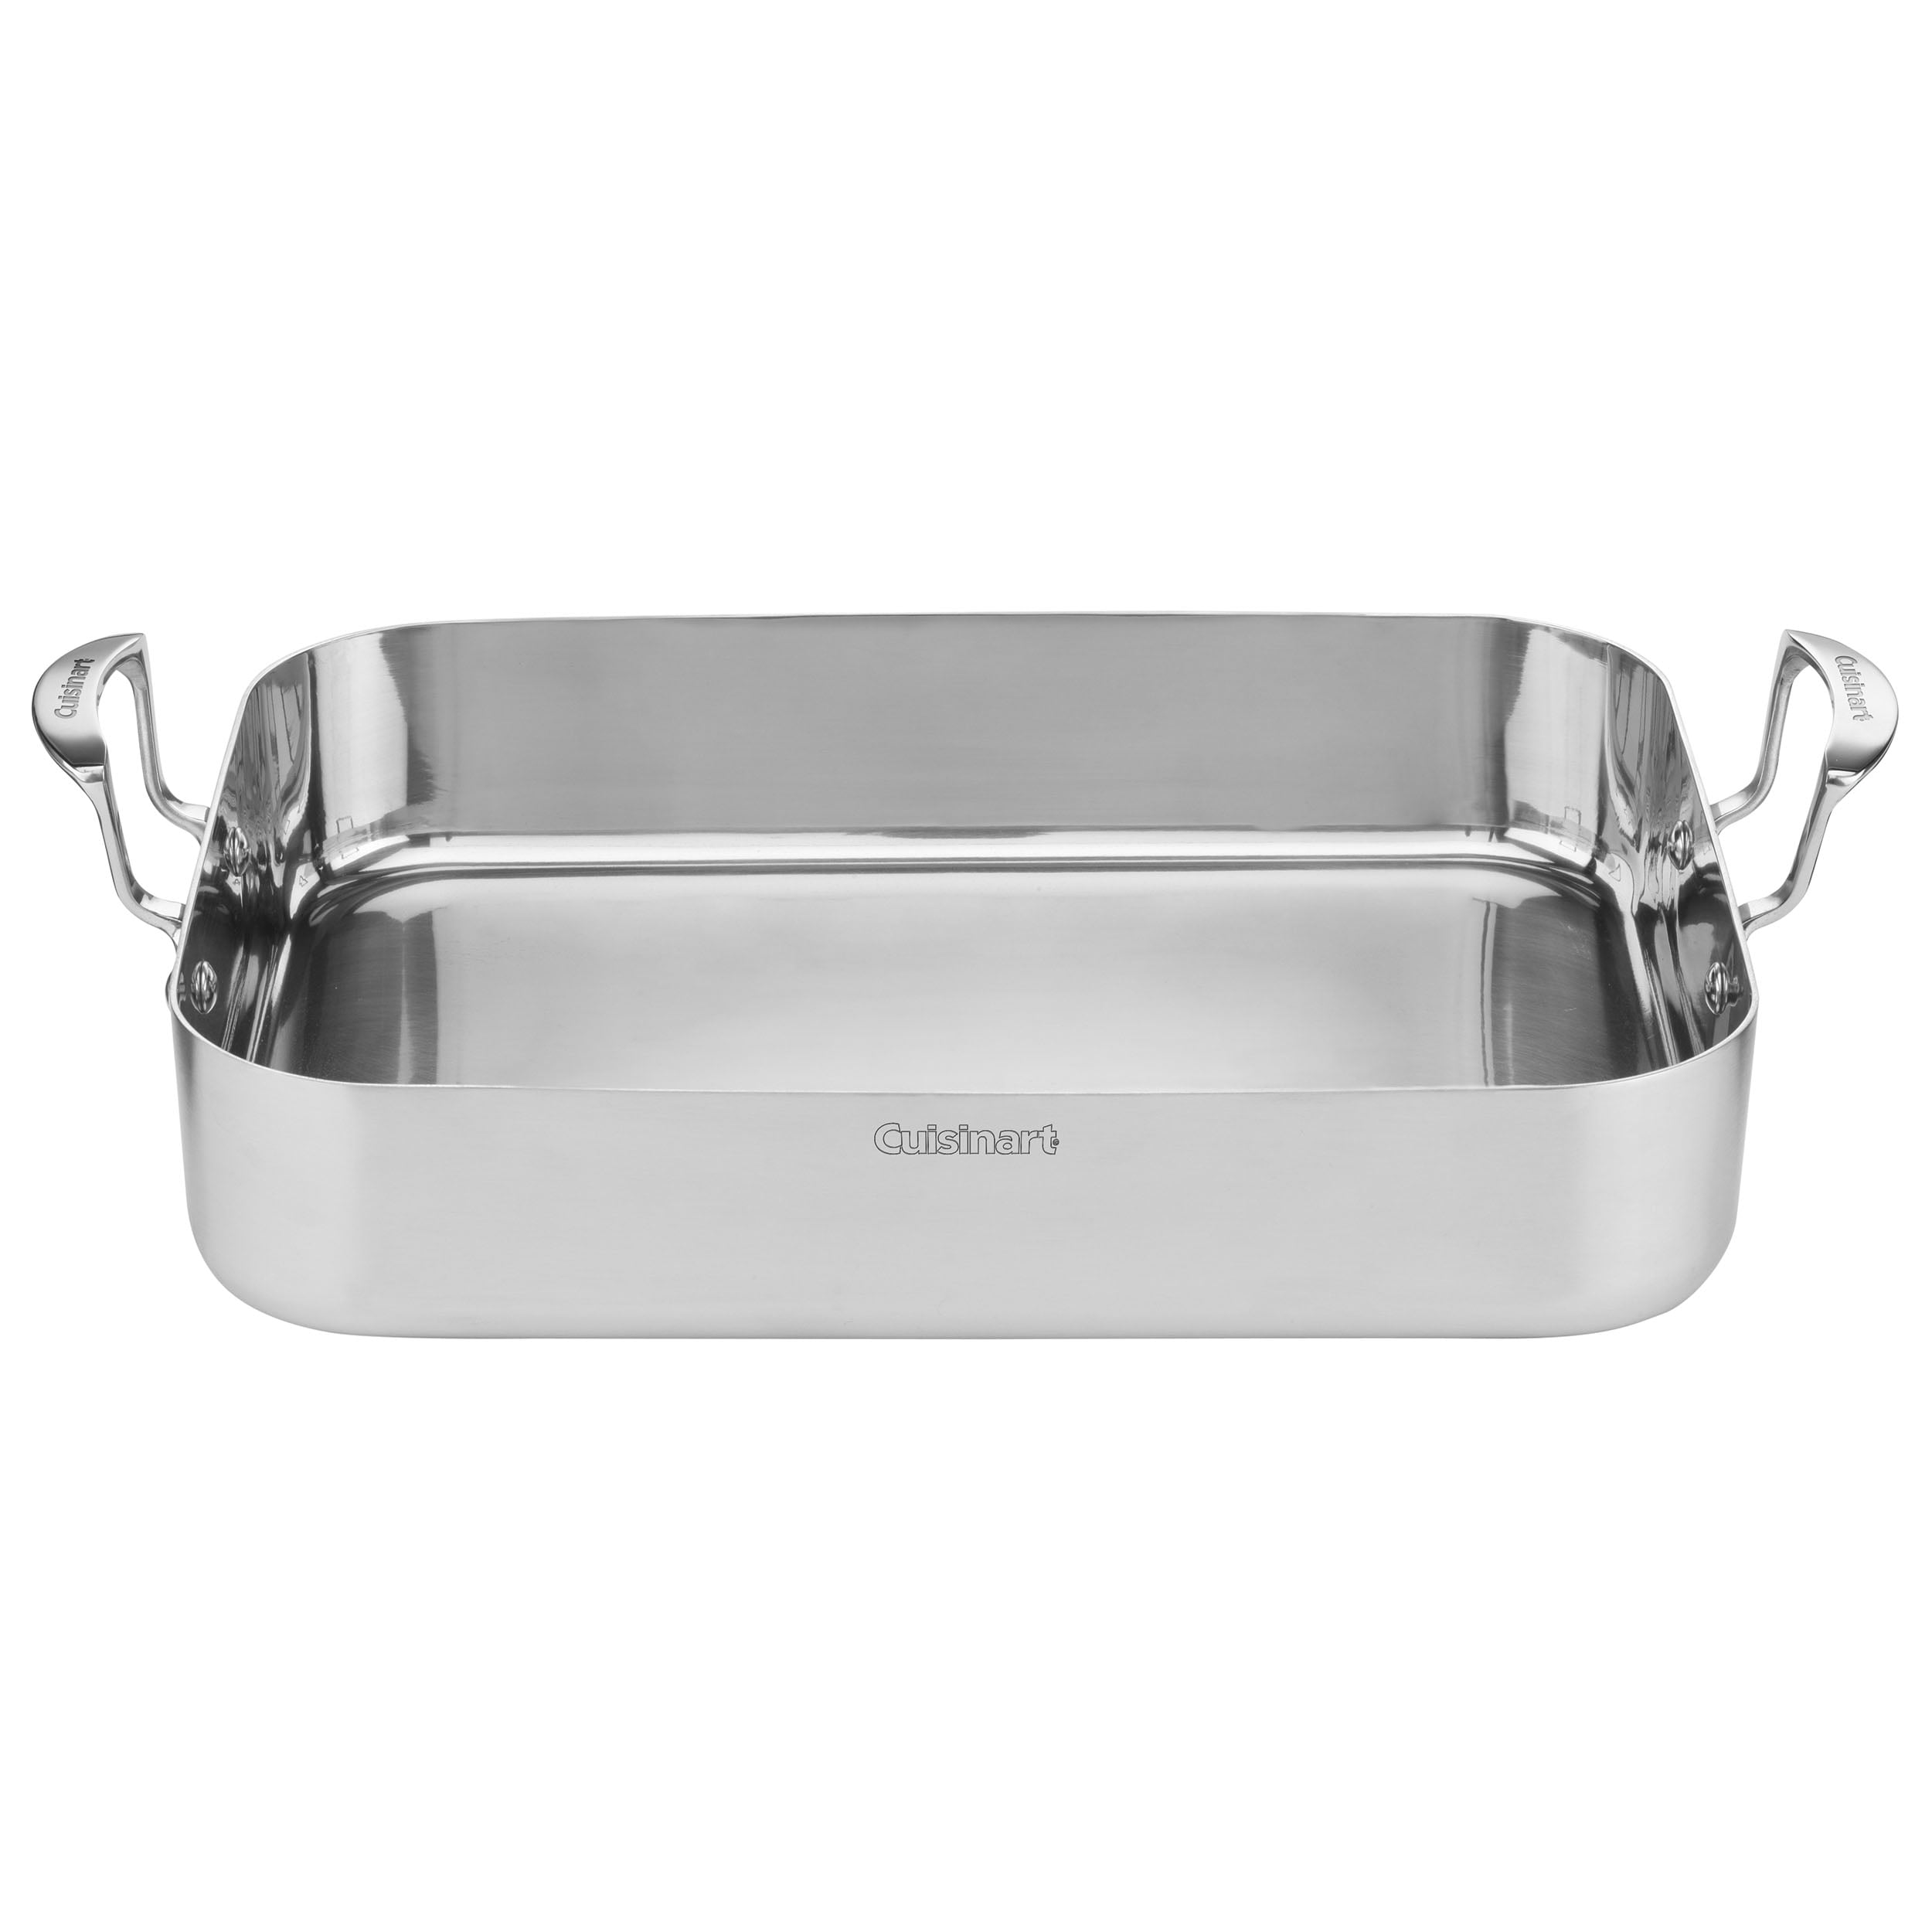 Cuisinart MultiClad Pro 6 Qt. Stainless Steel Roasting Pan with Rack  MCP117-16BR - The Home Depot